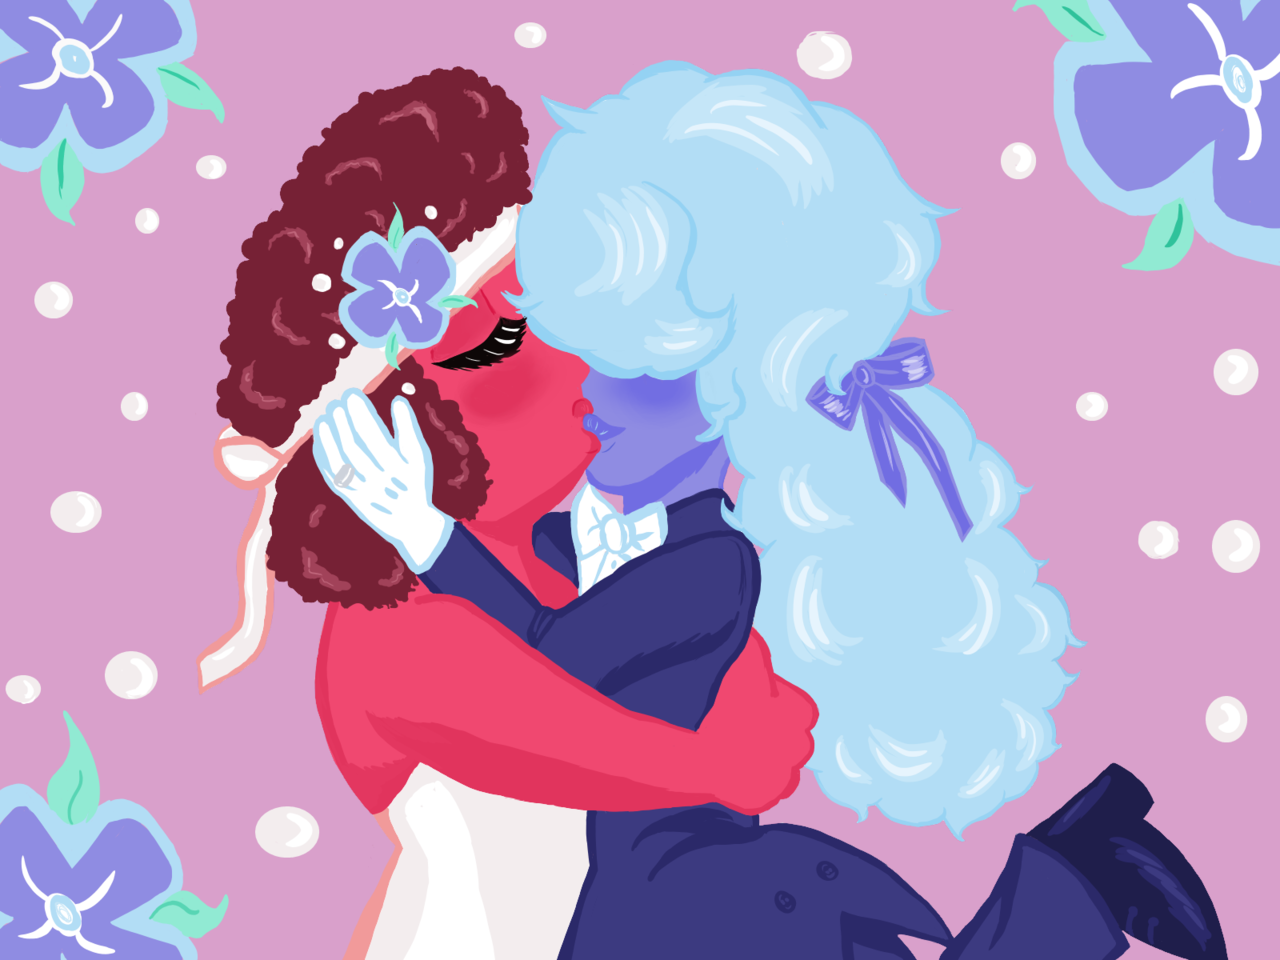 Iconic smooch!!! (im late to the party/wedding)